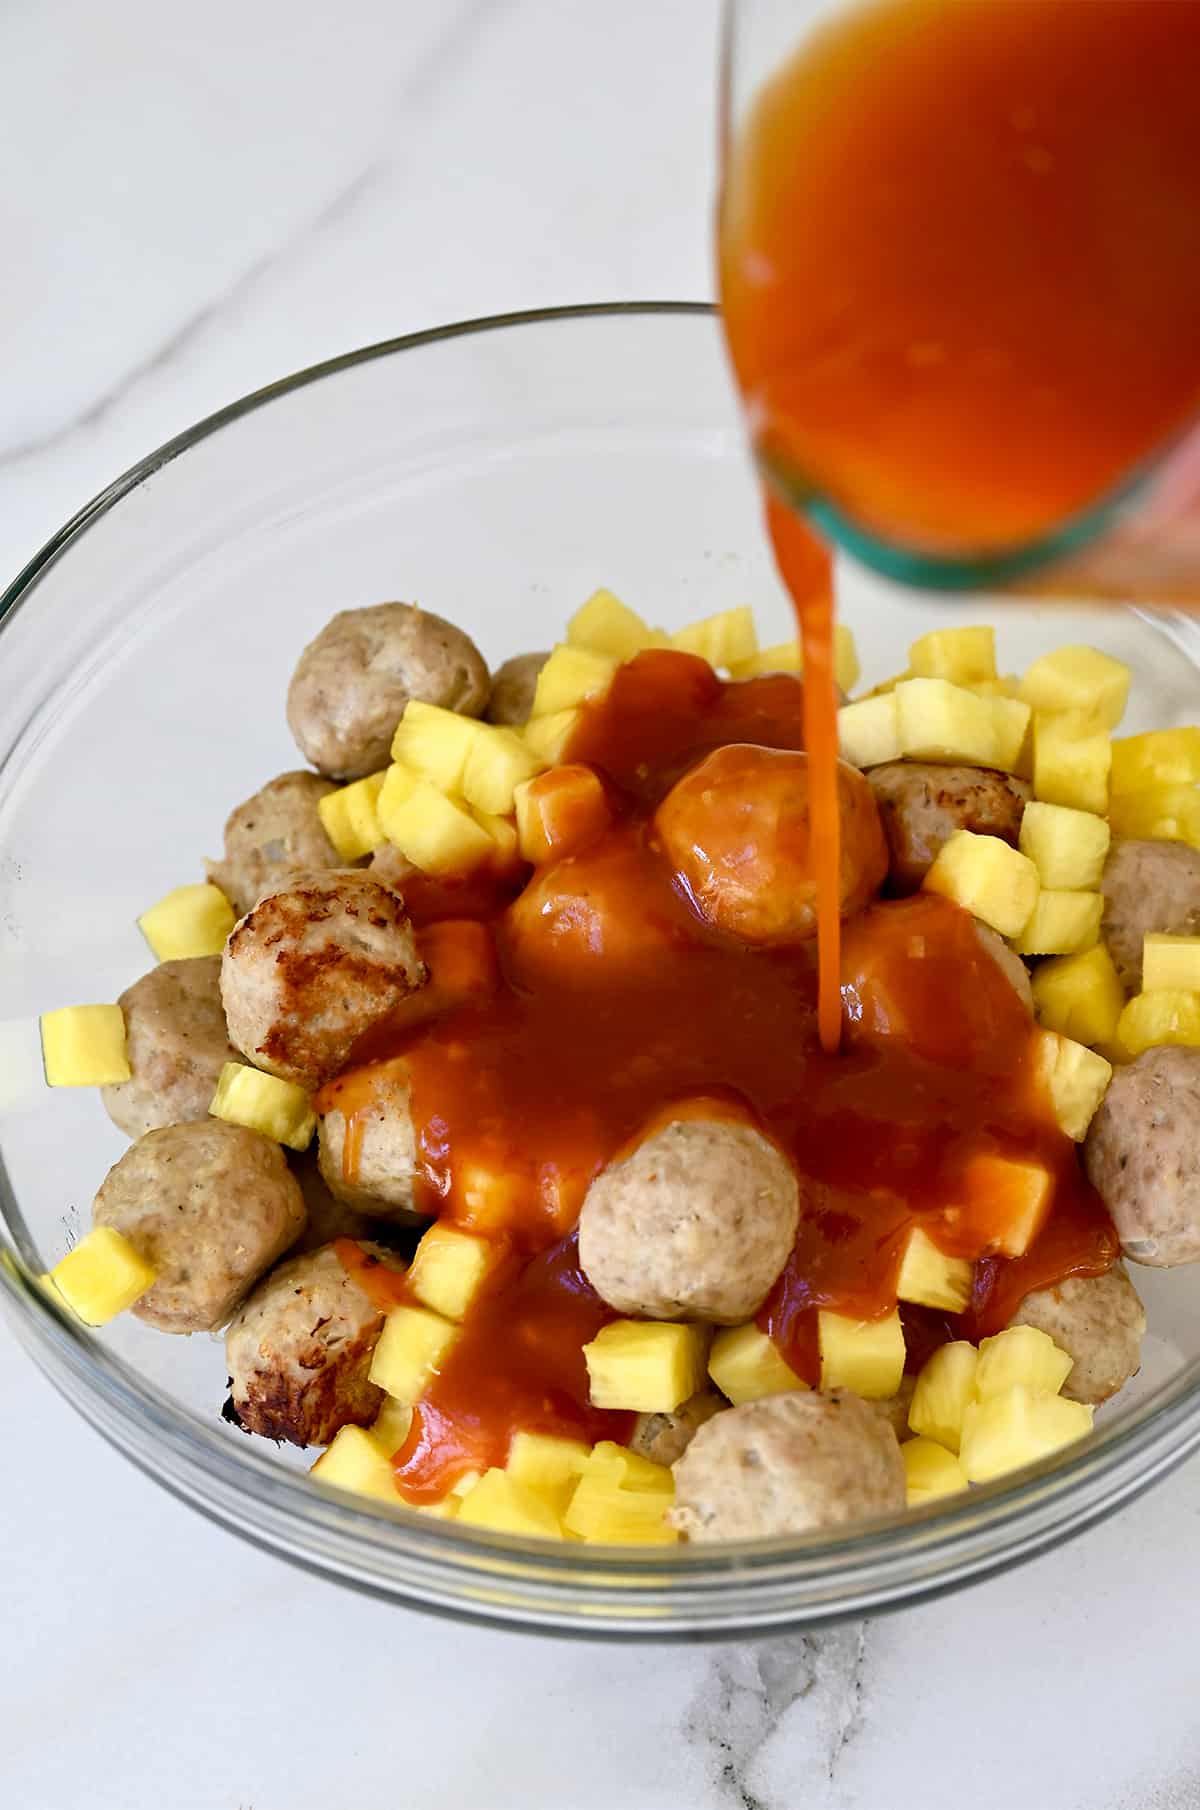 Sweet and sour sauce being poured over meatballs and pineapple chunks in a glass bowl.